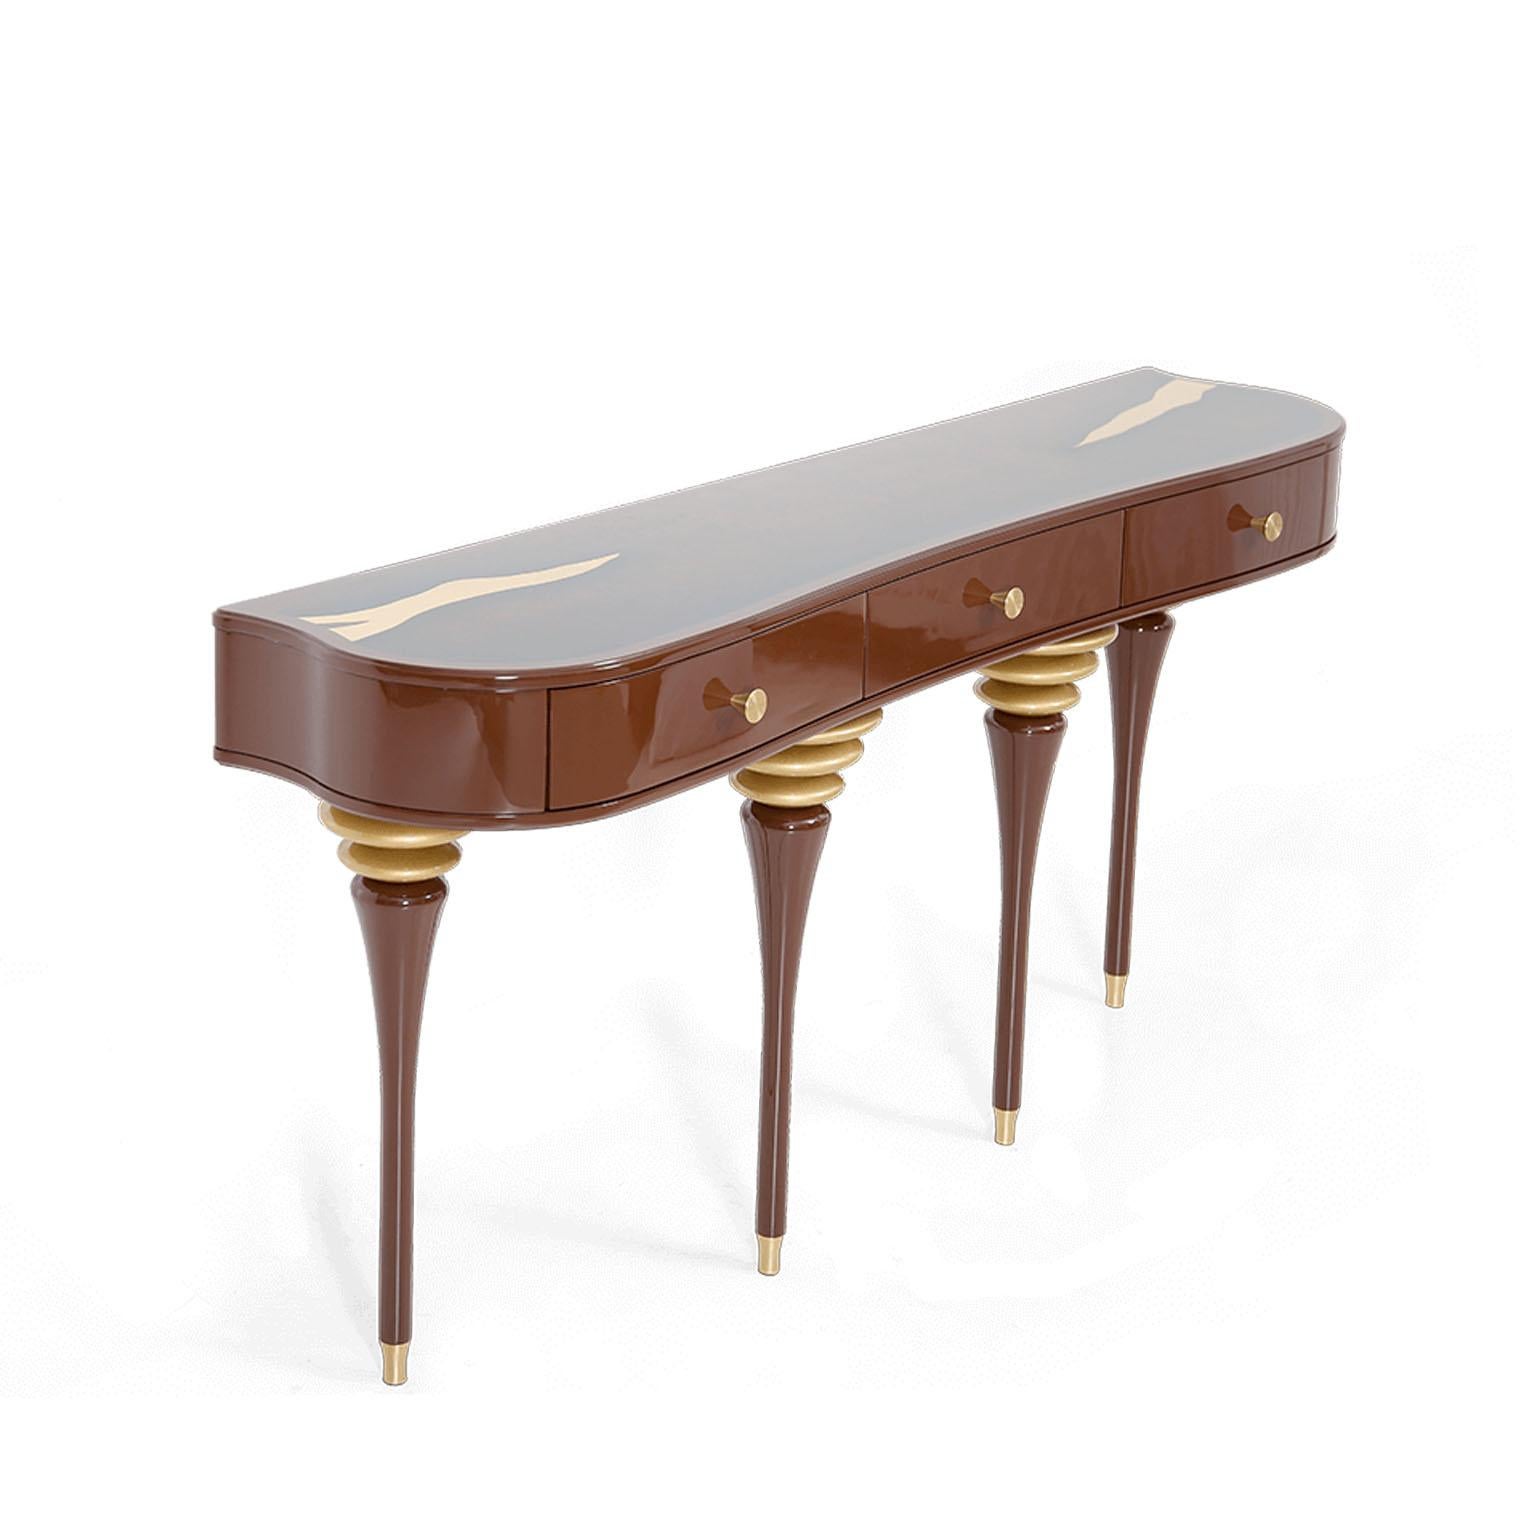 Exclusive console inspired by traditions of One Thousand and One Nights. Available in a curated selection of fashionable finishes, this elegant console table is crafted of solid wood finished in high gloss and supported by elegant legs. Triple red